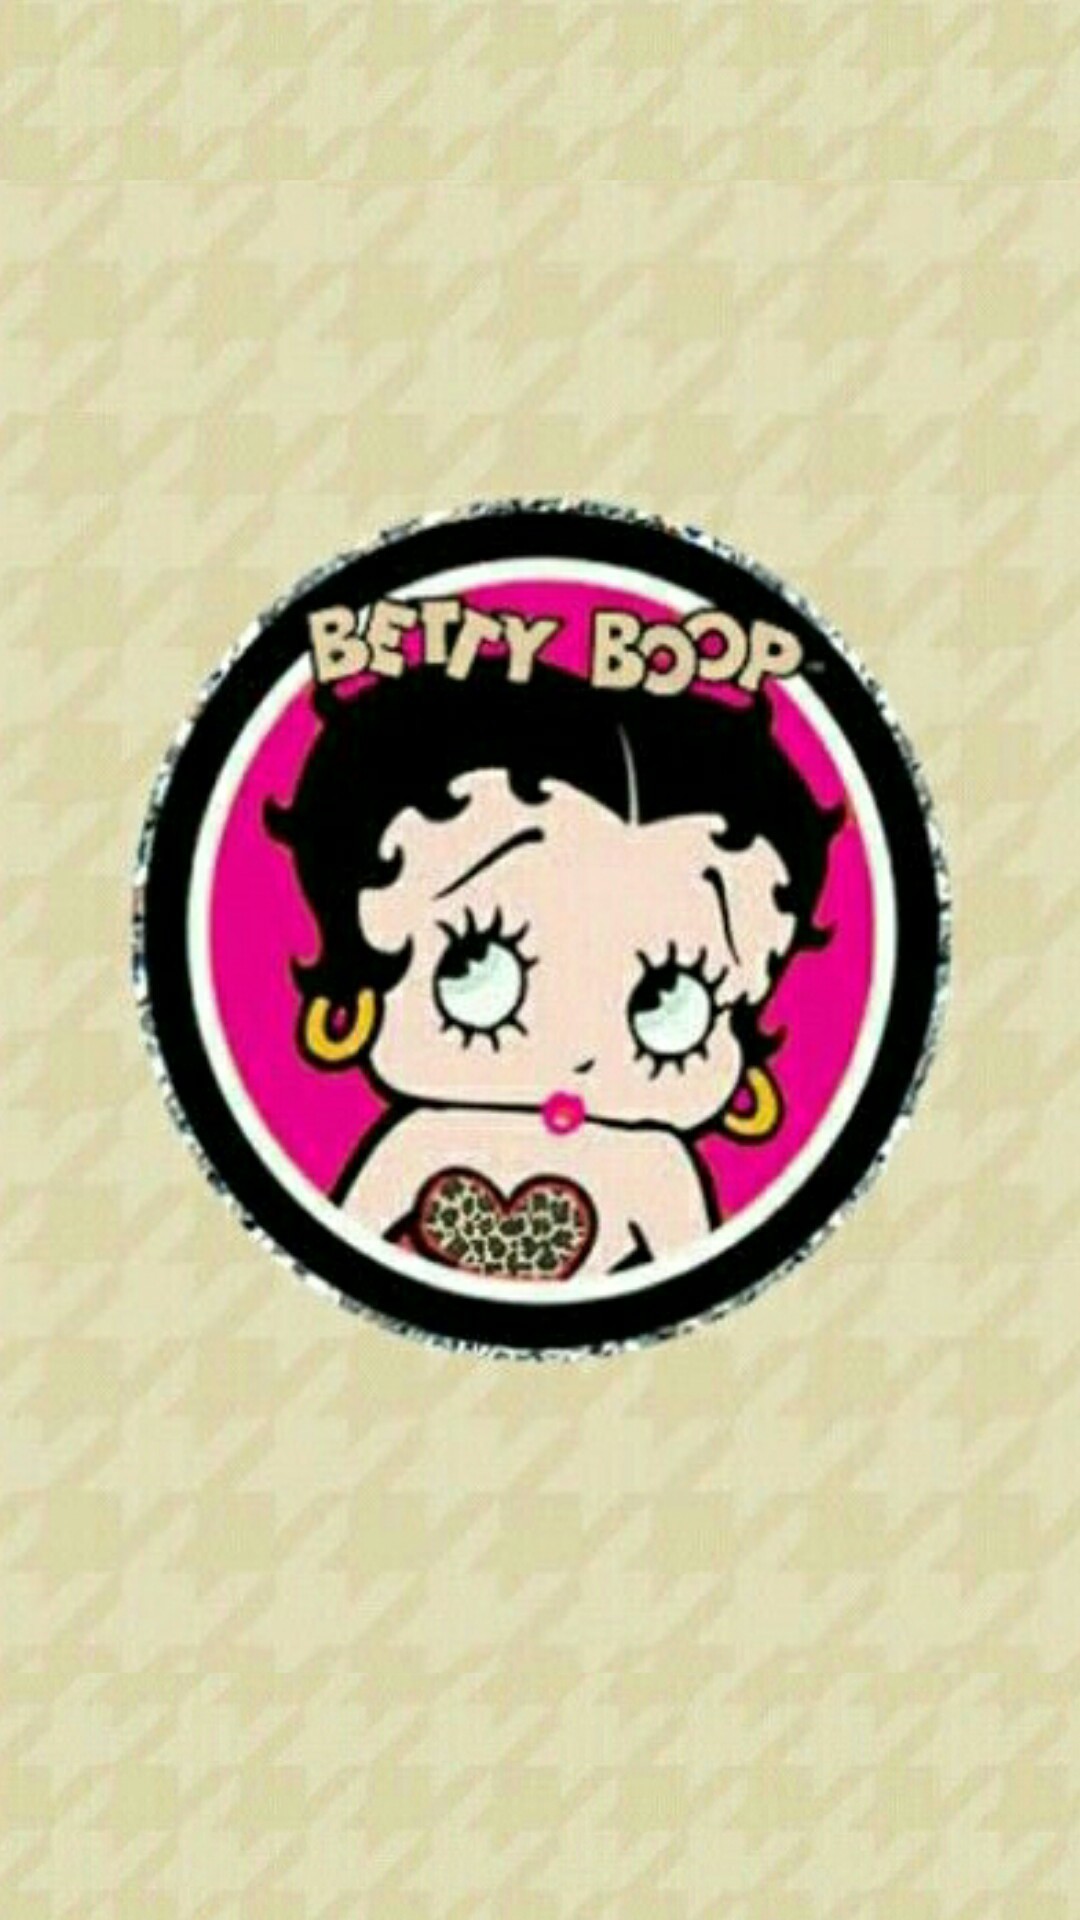 1080x1920 ... Black Betty Boop Wallpapers 53 background pictures